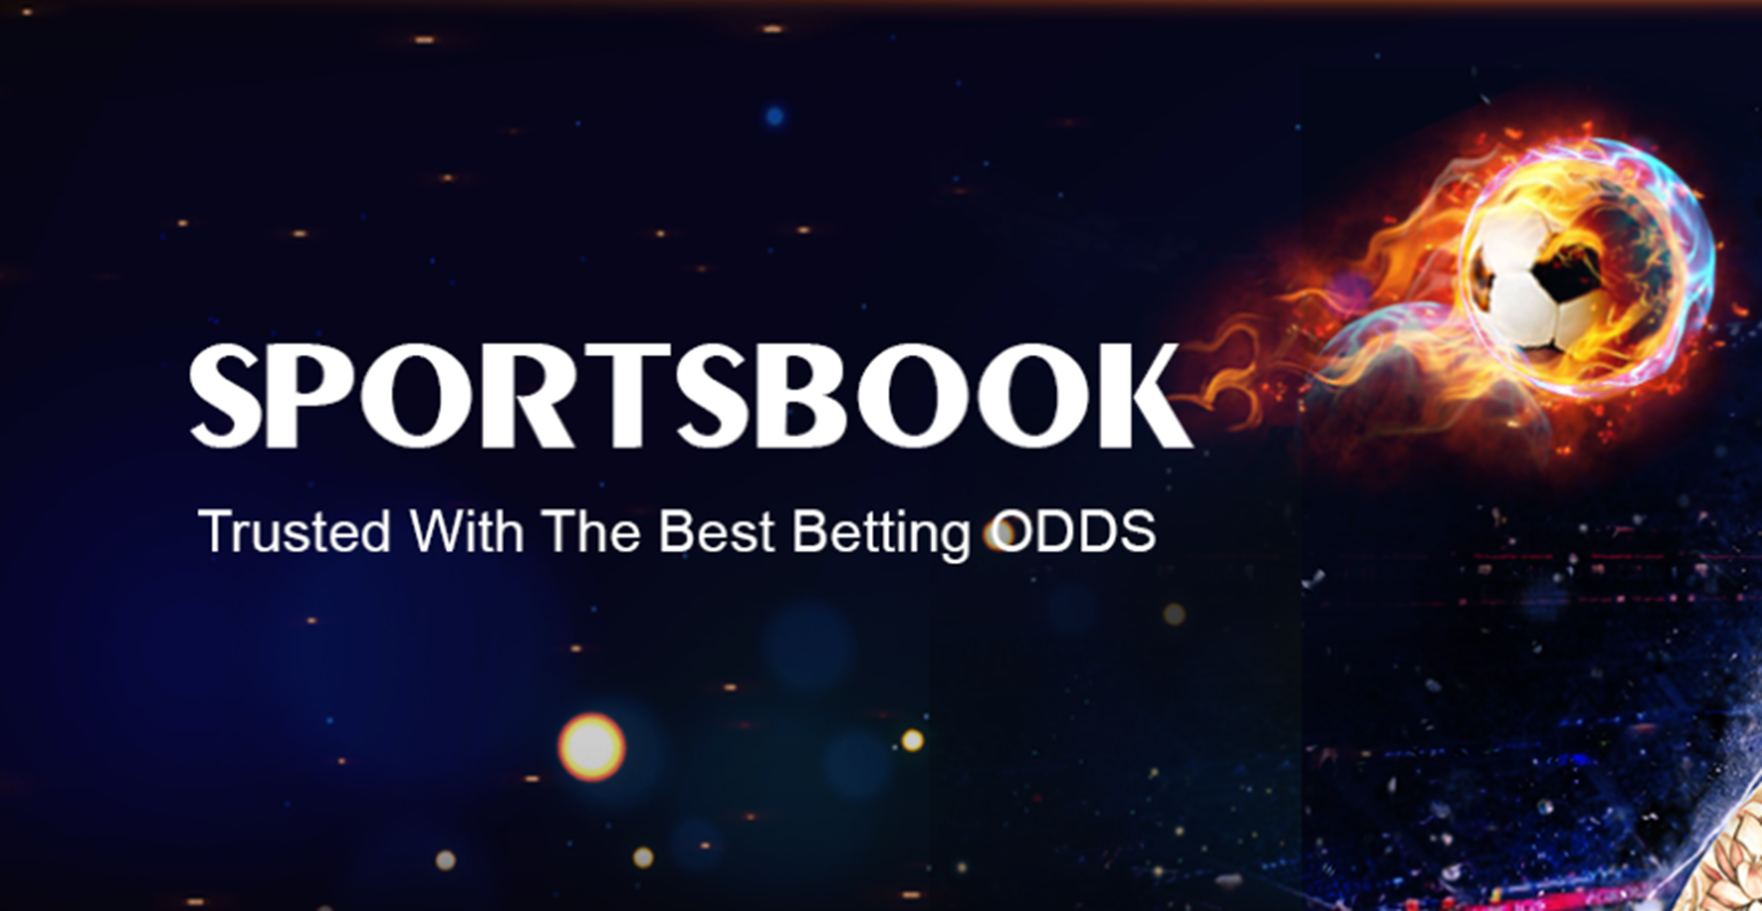 How to Identify a Reliable Online Betting Site: Key Indicators to Look For